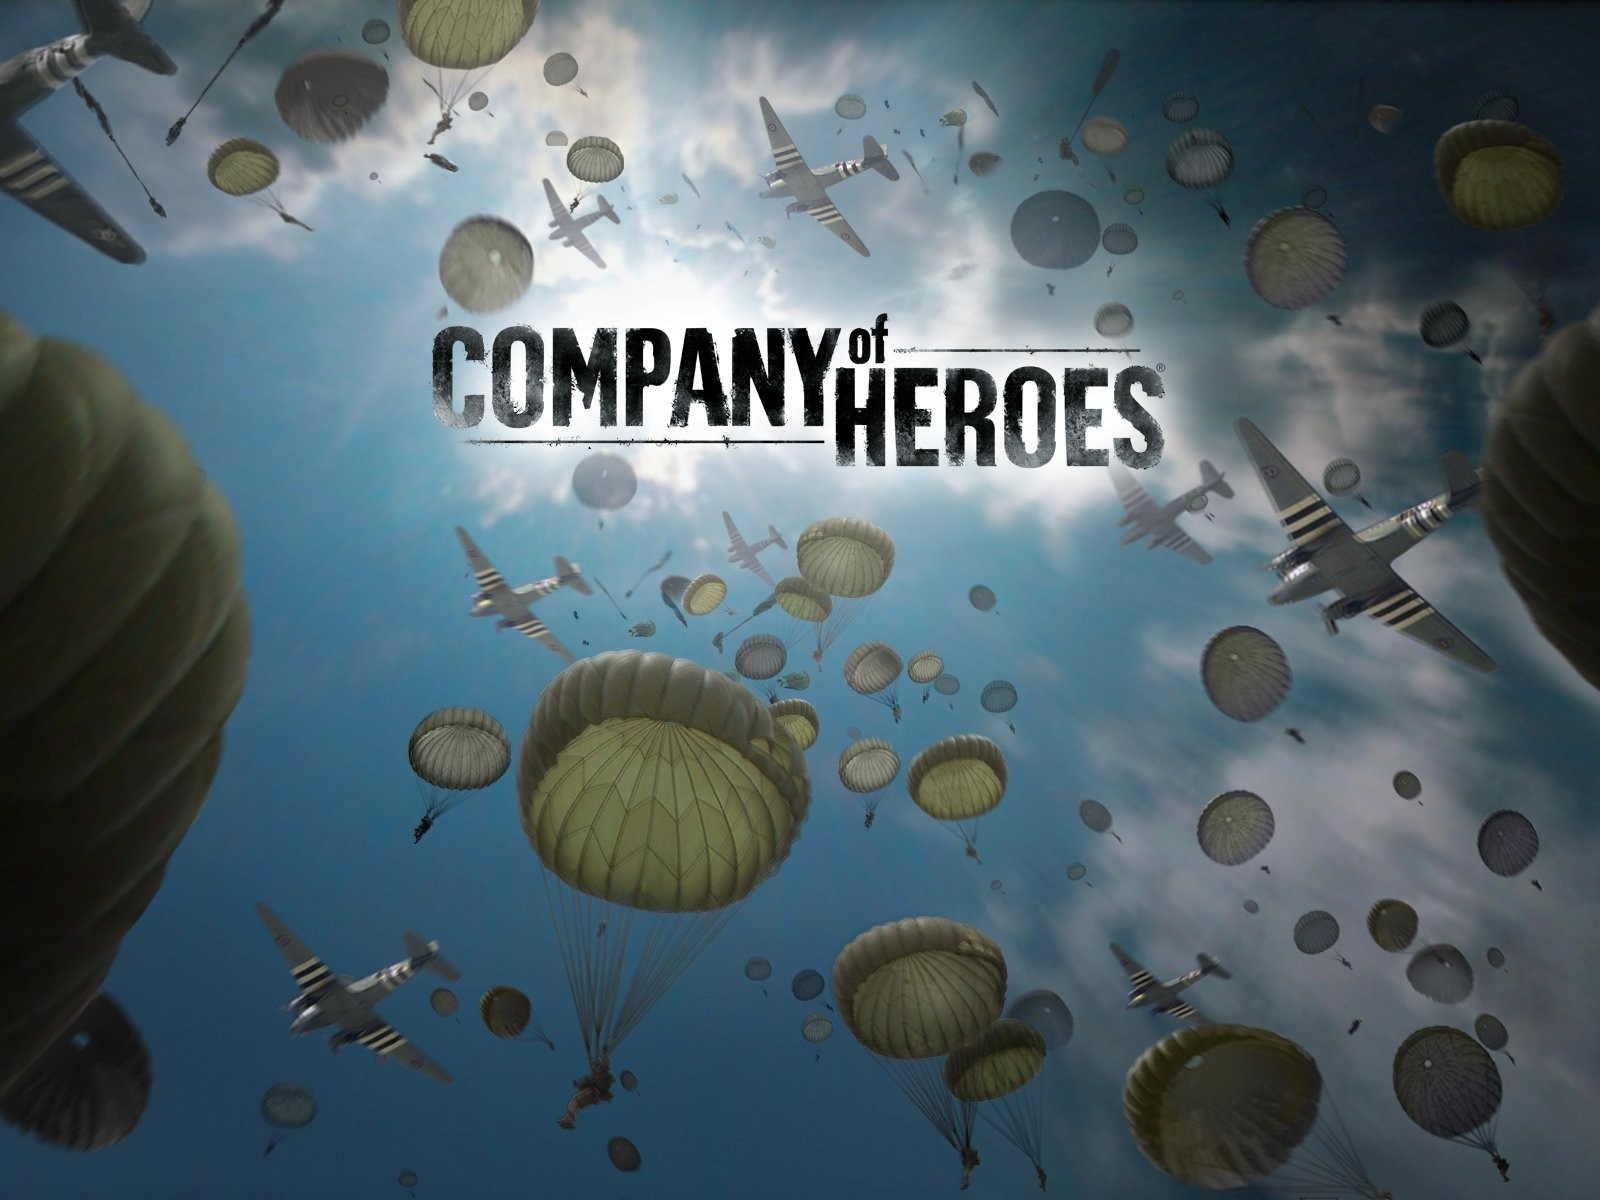 Company of Heroes for 1600 x 1200 resolution